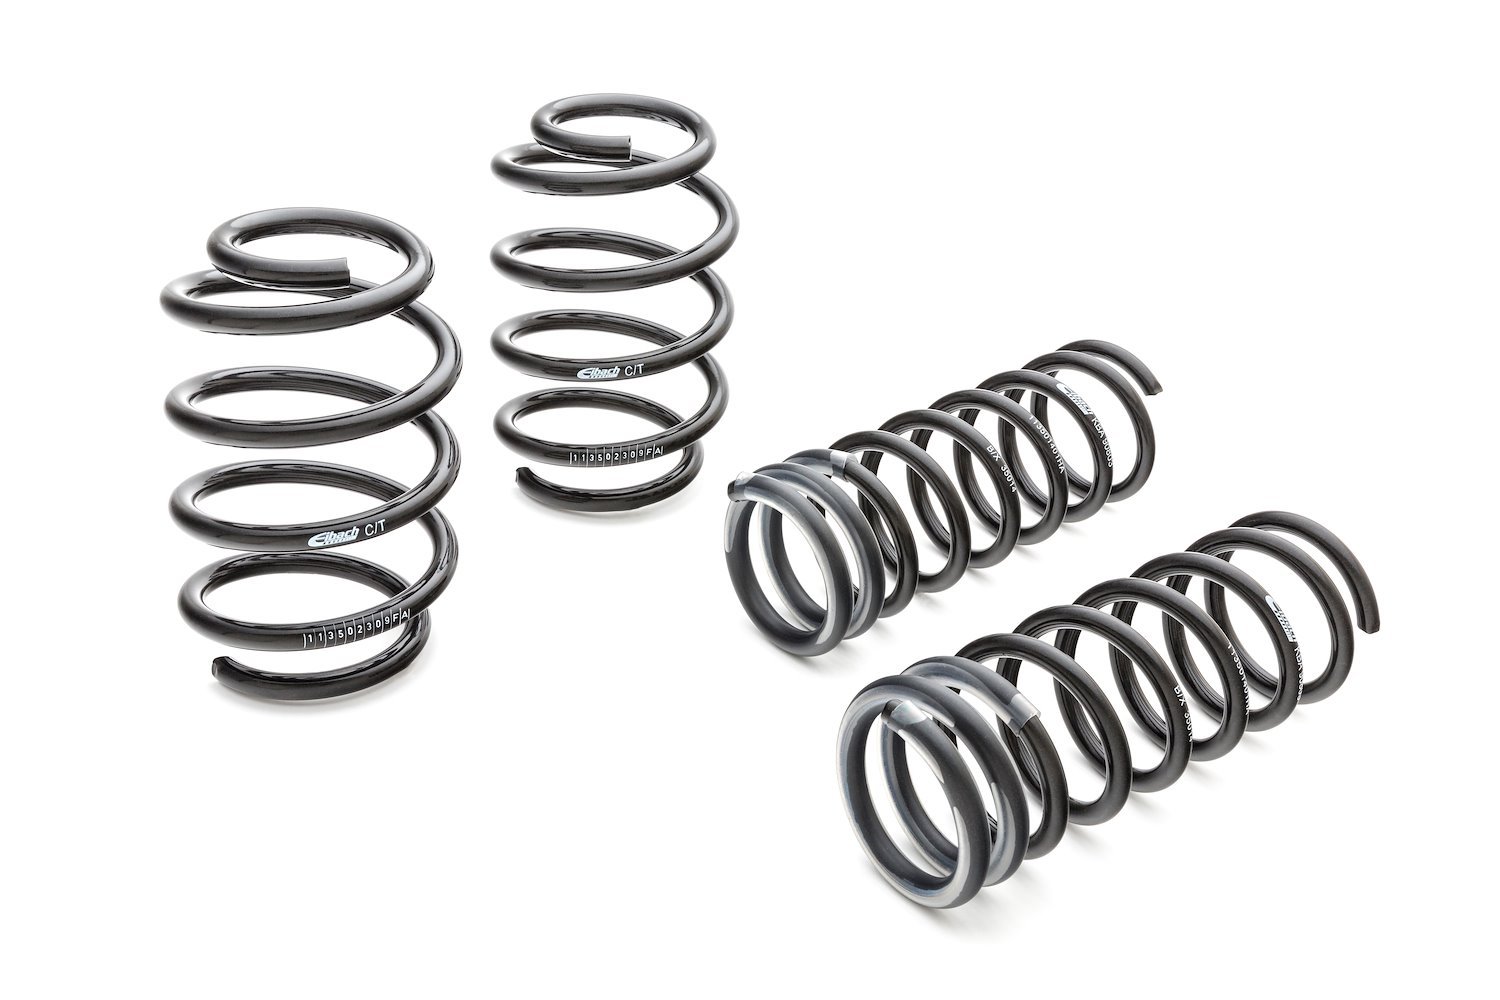 6392.140 Pro-Kit Lowering Springs 2009-2014 for Nissan Maxima 3.5L - 1.300 in. Front/1.400 in. Rear Drop